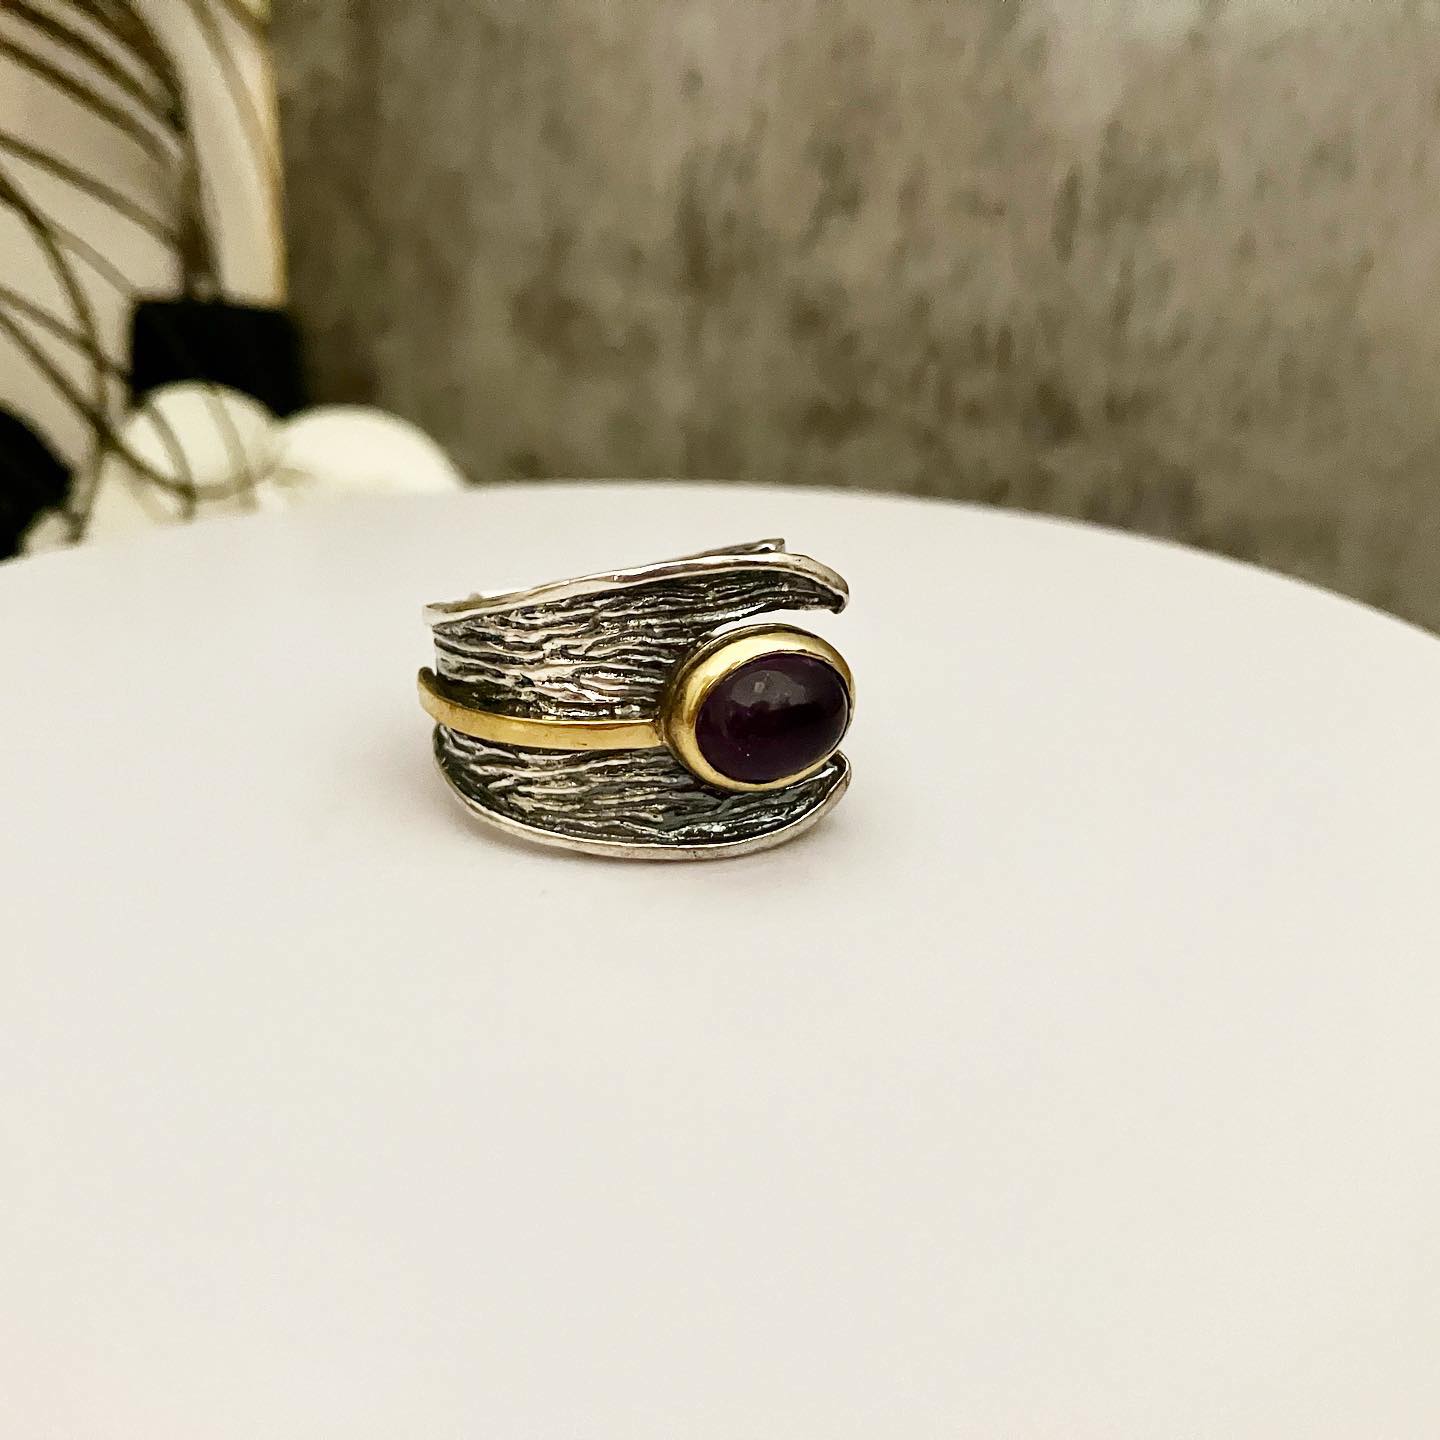 Ring blackened silver with partial gilding and amethyst.